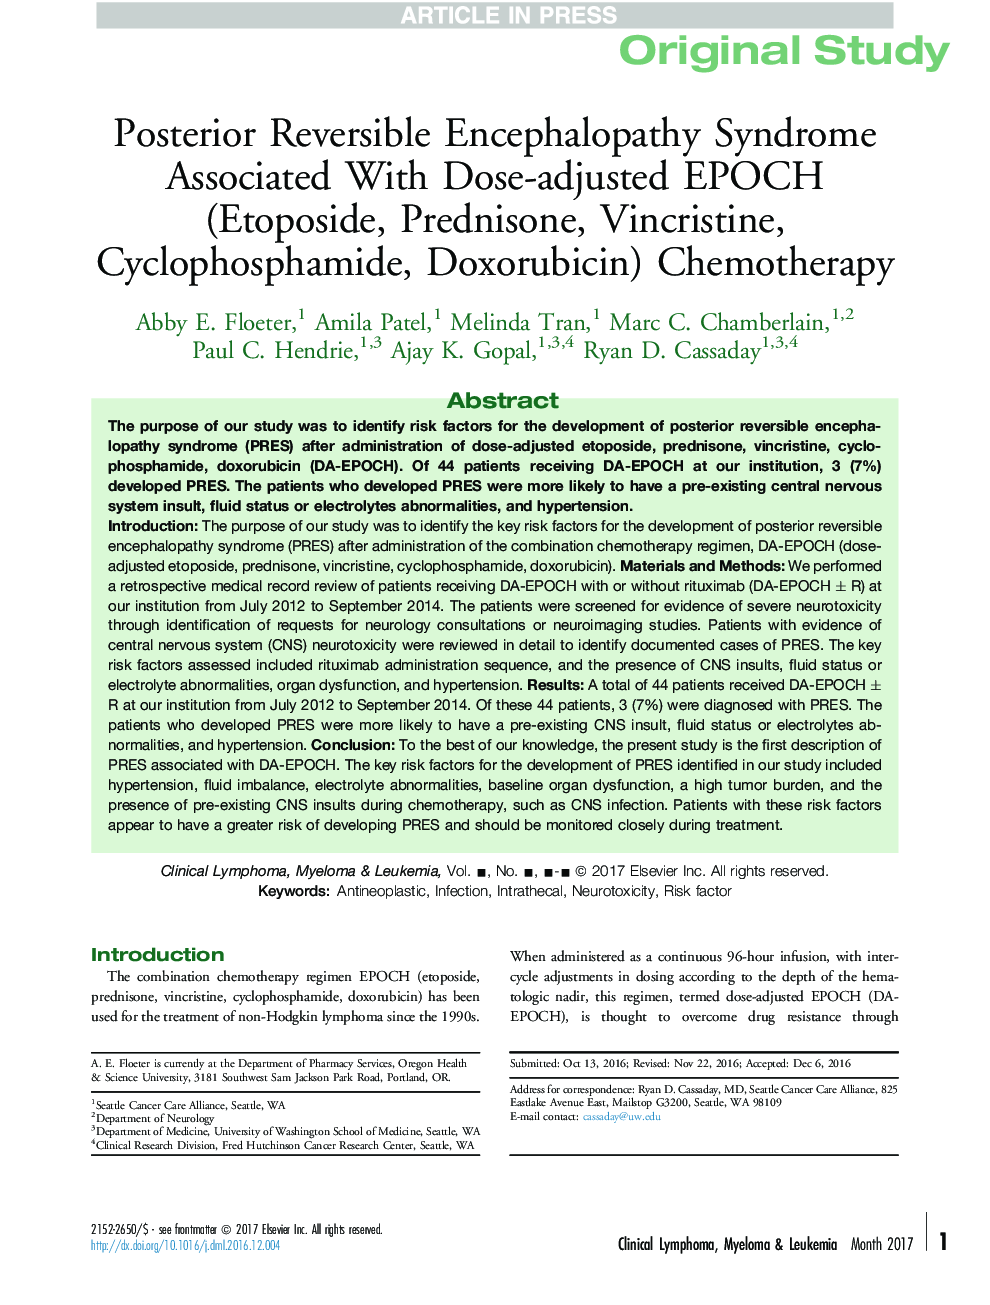 Posterior Reversible Encephalopathy Syndrome Associated With Dose-adjusted EPOCH (Etoposide, Prednisone, Vincristine, Cyclophosphamide, Doxorubicin) Chemotherapy